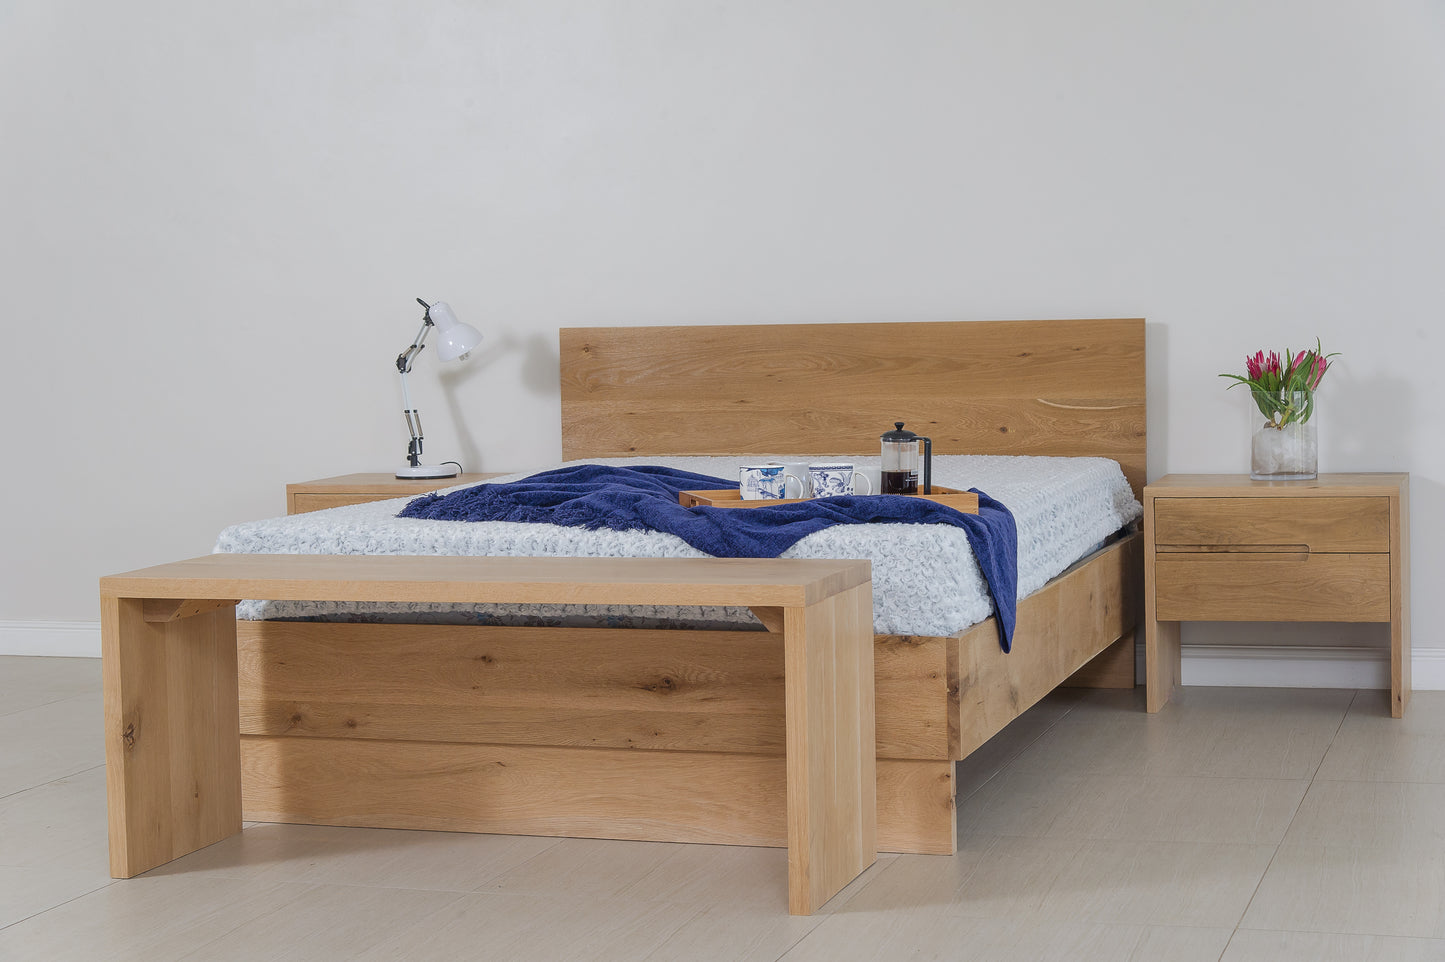 A Nina custom-made bed from Naka Furniture. The bed is made from high-quality solid wood and is available in a variety of sizes and finishes. It can also be customized to your specific needs and preferences.